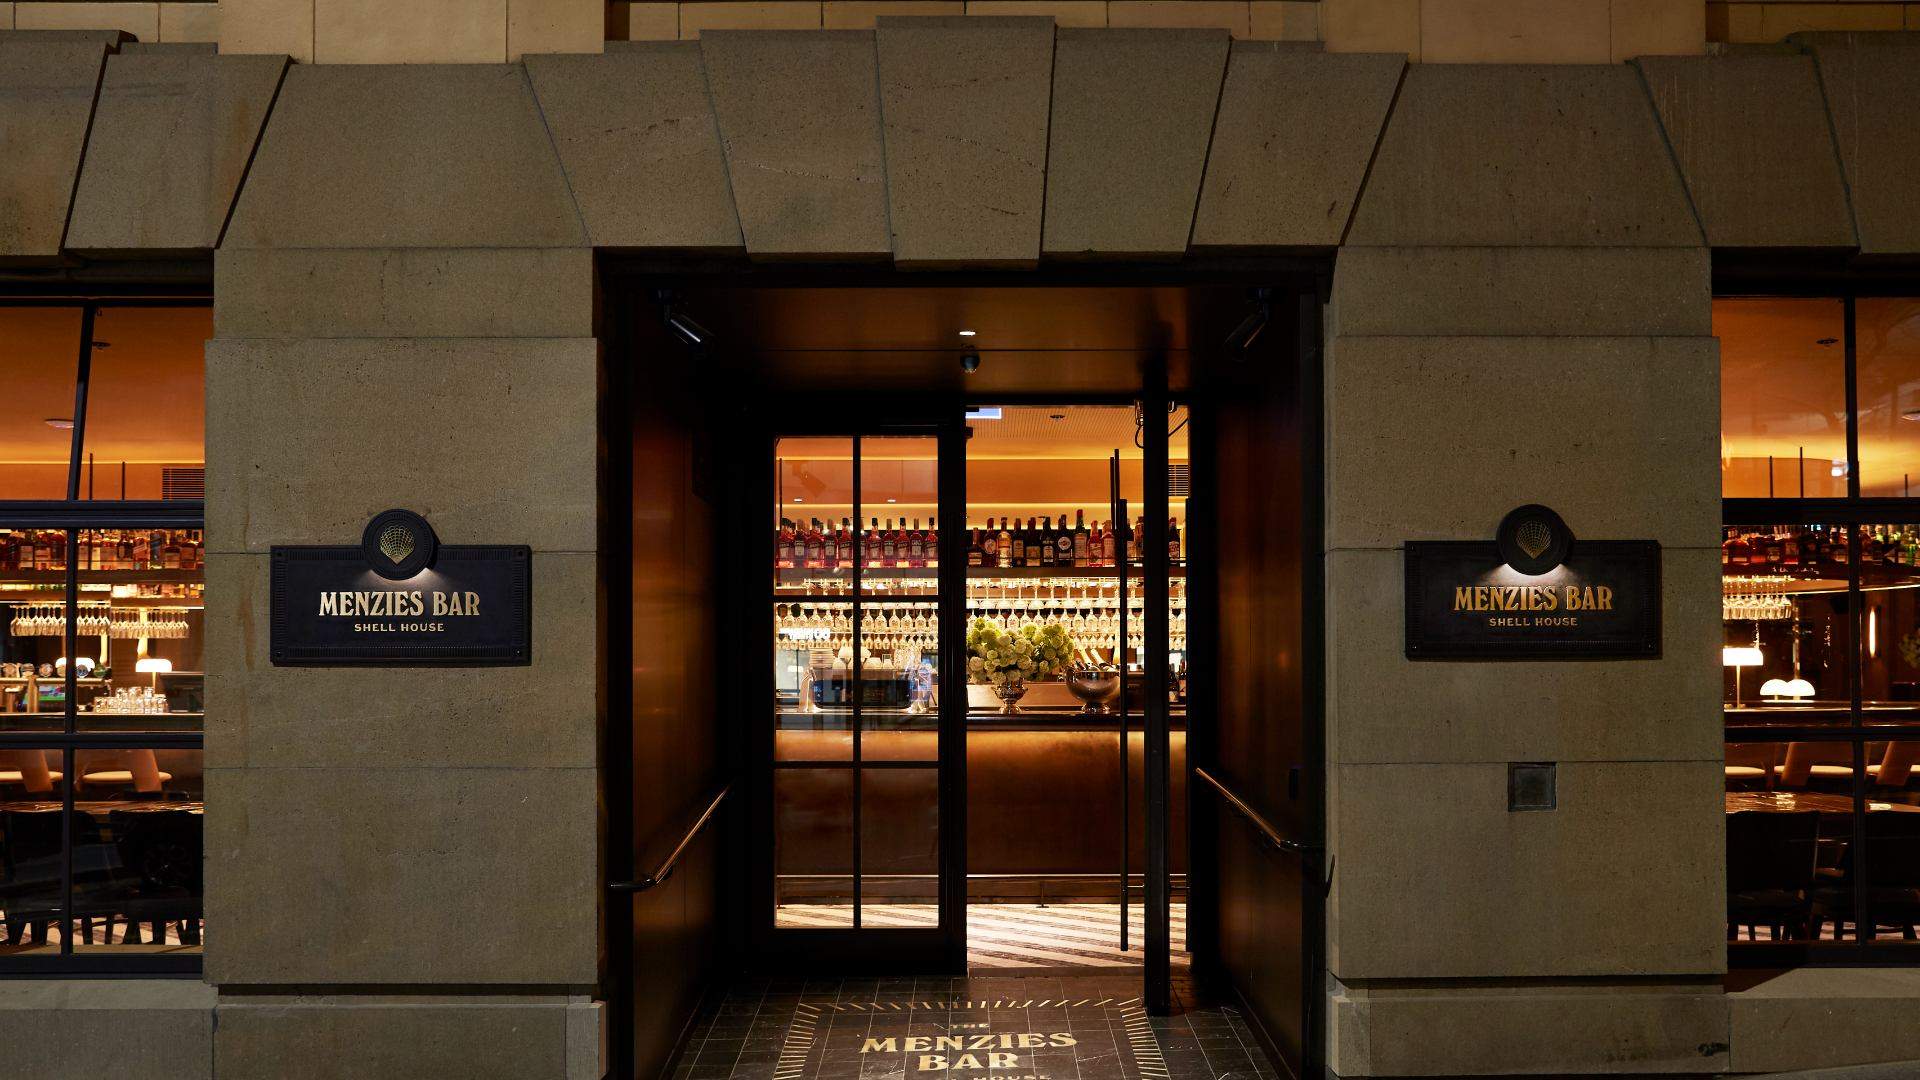 The Menzies Bar Is the First Venue Opening Inside the CBD's Historic Shell House Next Week